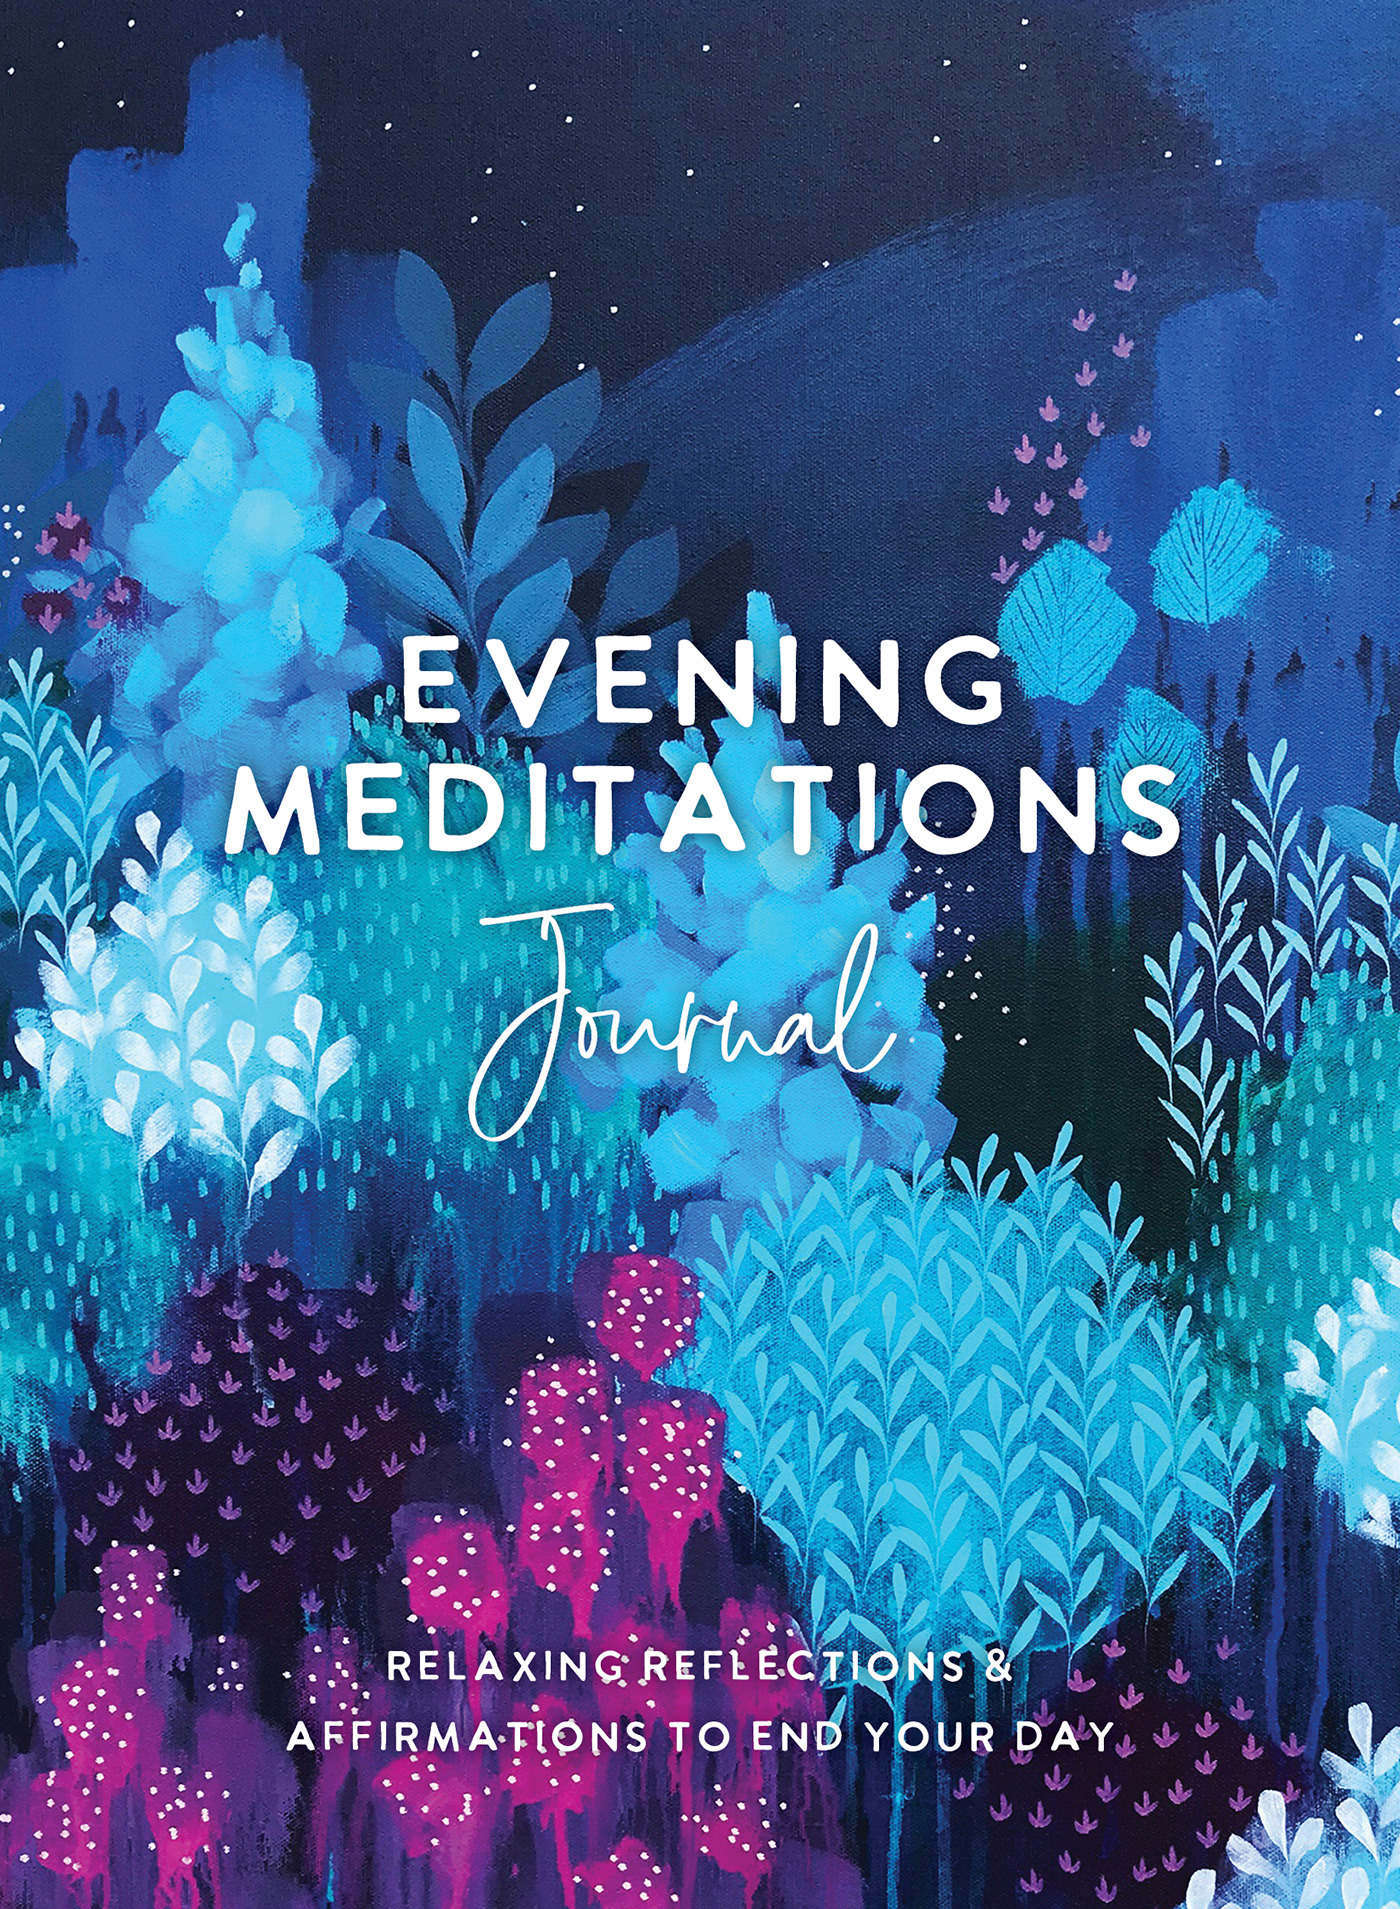 Evening Meditations Journal : Relaxing Reflections &amp; Affirmations to End Your Day | The Editors of Hay House